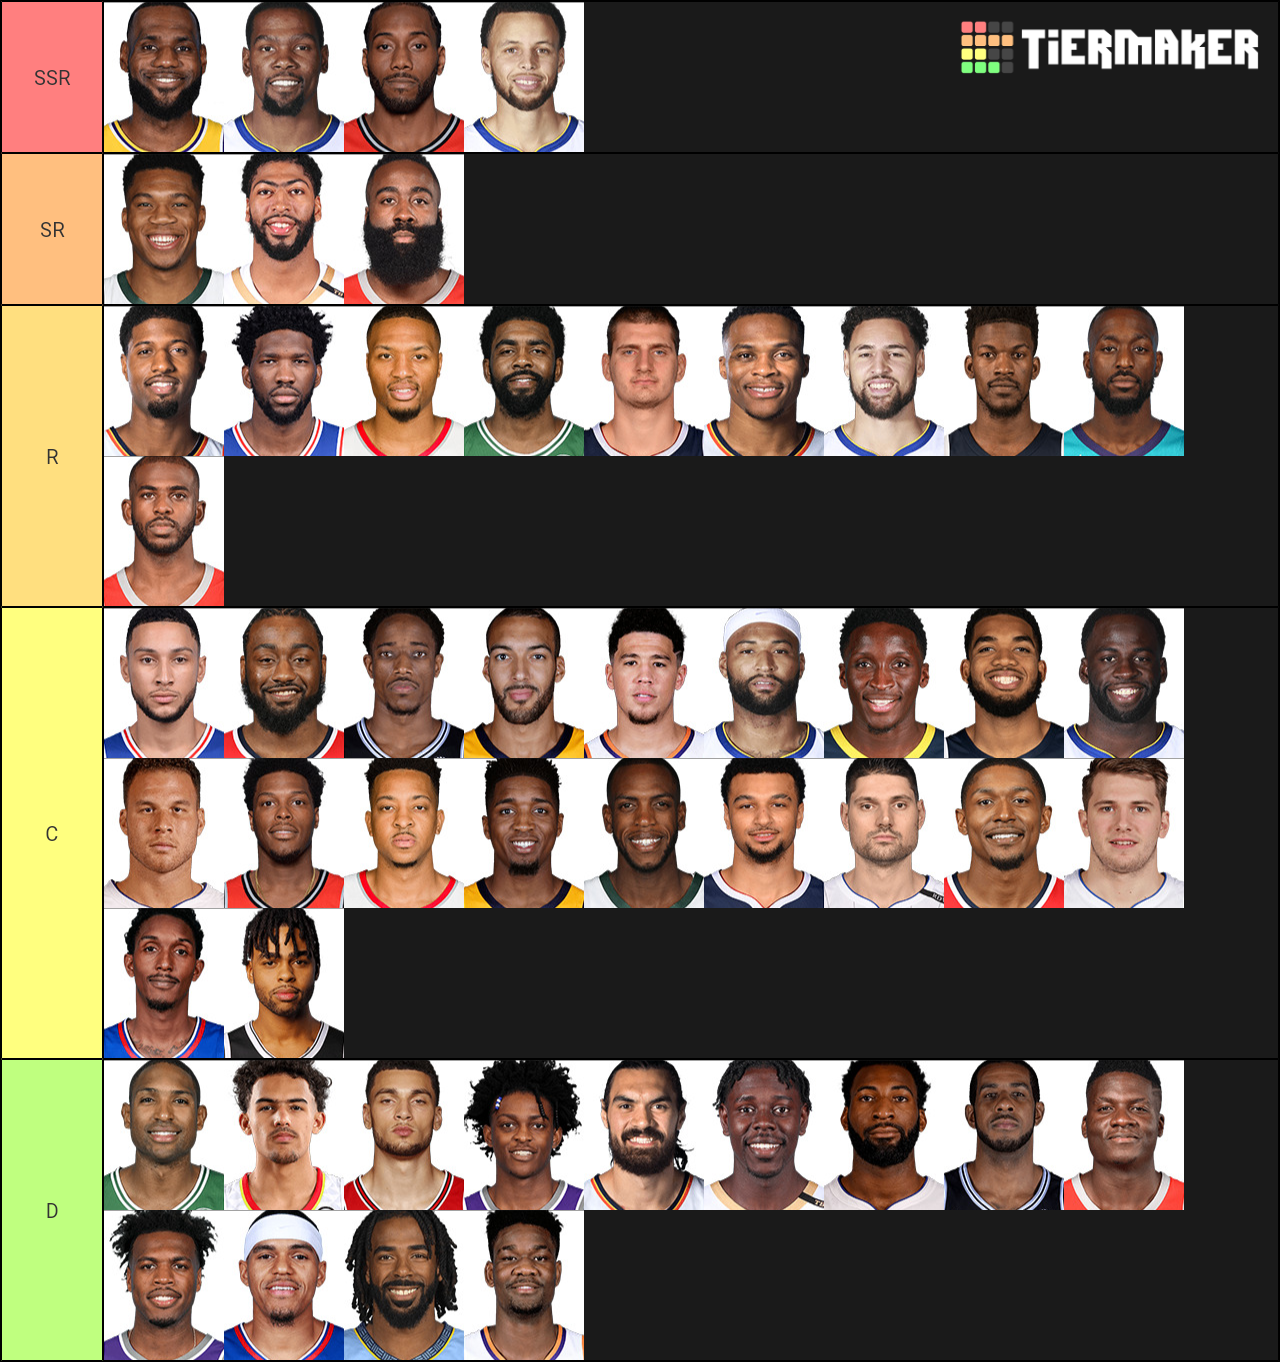 Top All Time Nba Players Tier List Community Rankings Tiermaker